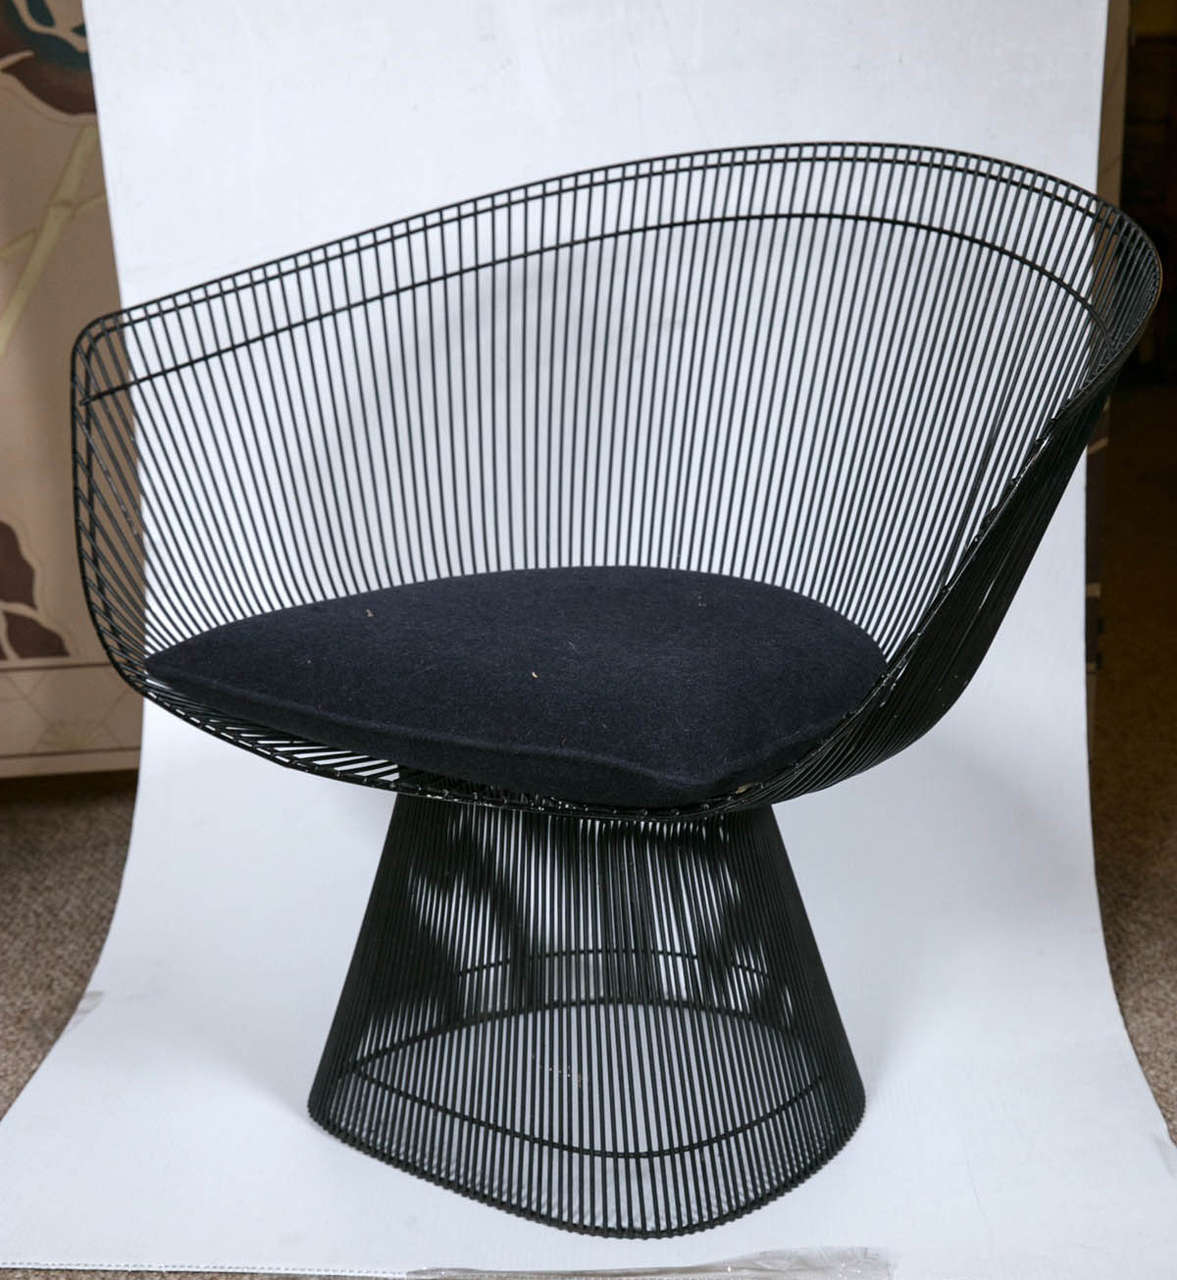 Midcentury Warren Platner lounge chair. This iconic Warren Platner lounge chair introduced by Knoll International in 1966; of nickel wire base and basket frame with upholstered seat.